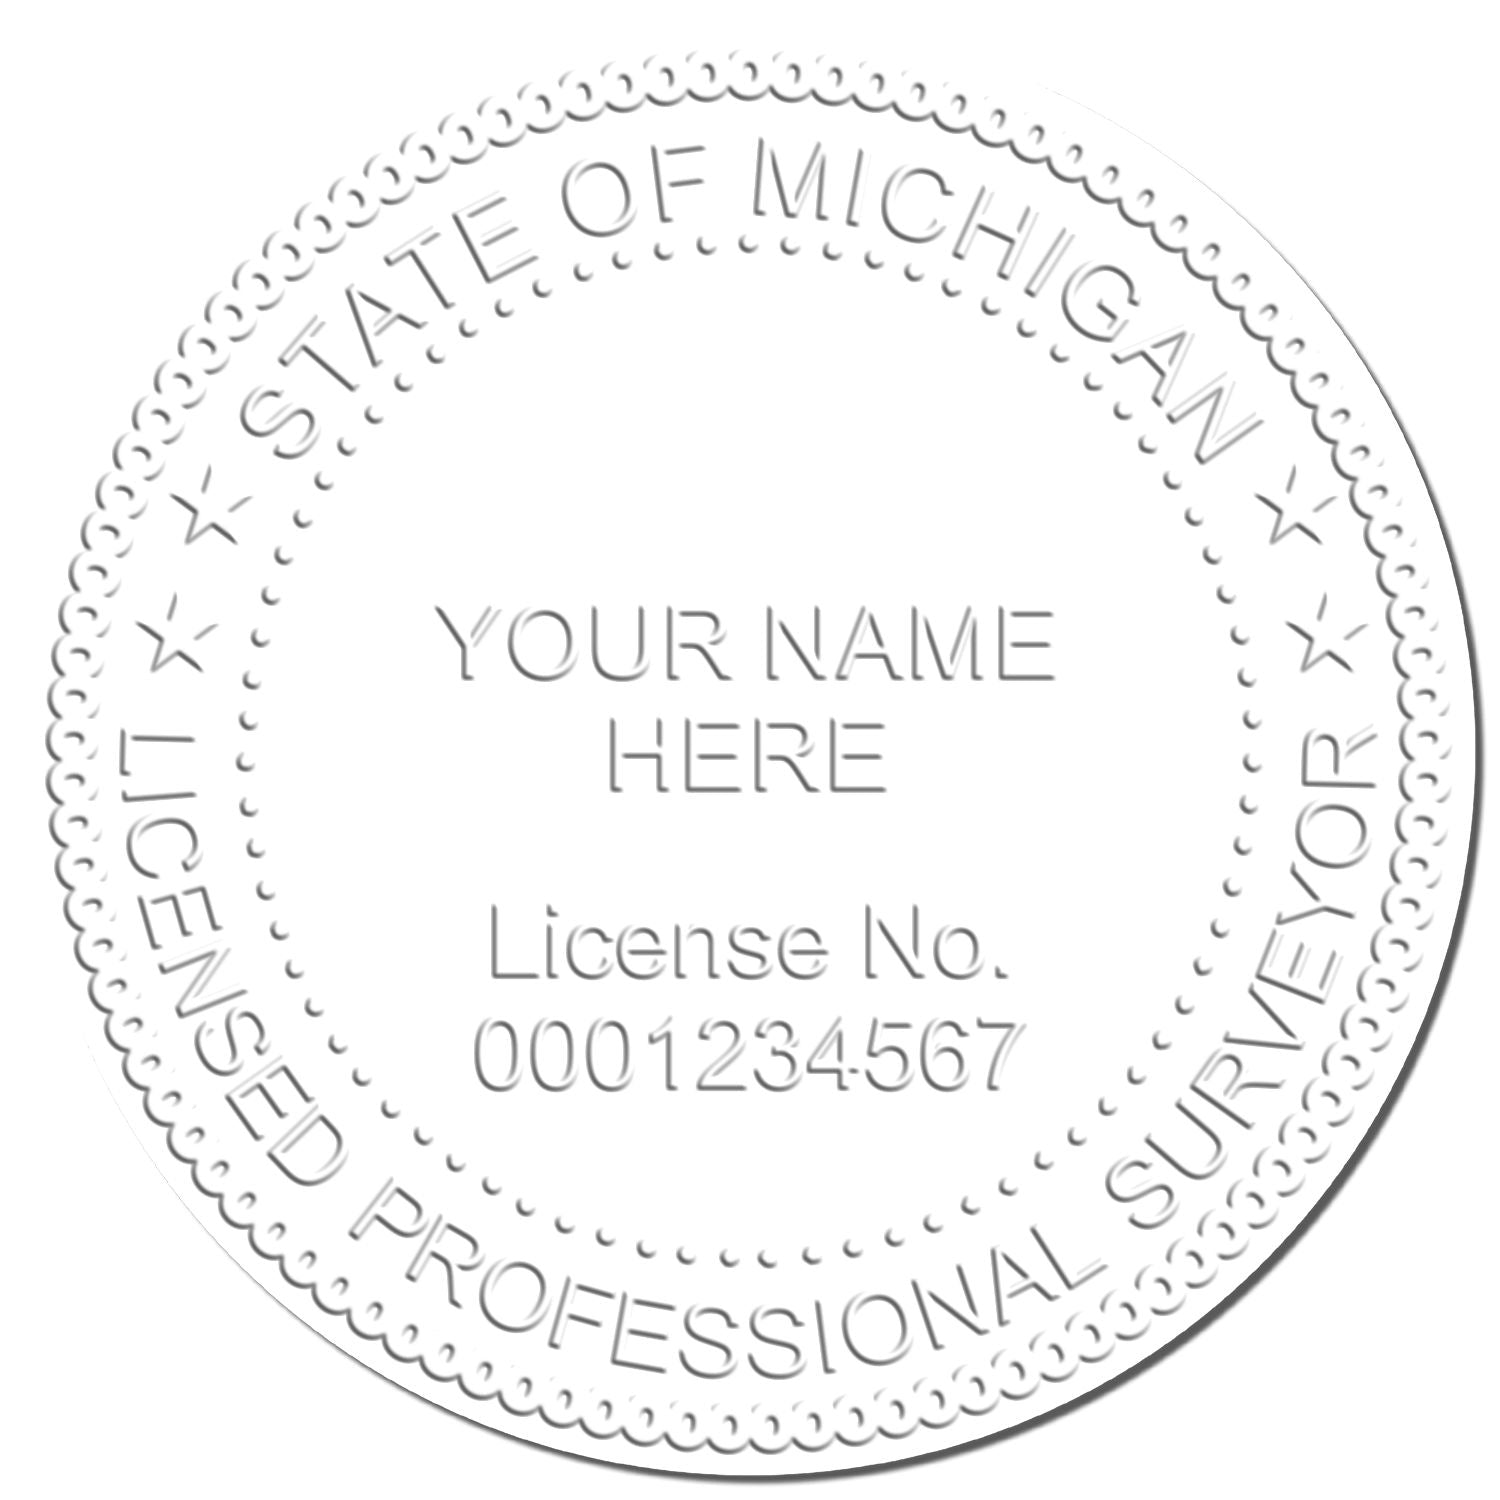 This paper is stamped with a sample imprint of the Heavy Duty Cast Iron Michigan Land Surveyor Seal Embosser, signifying its quality and reliability.